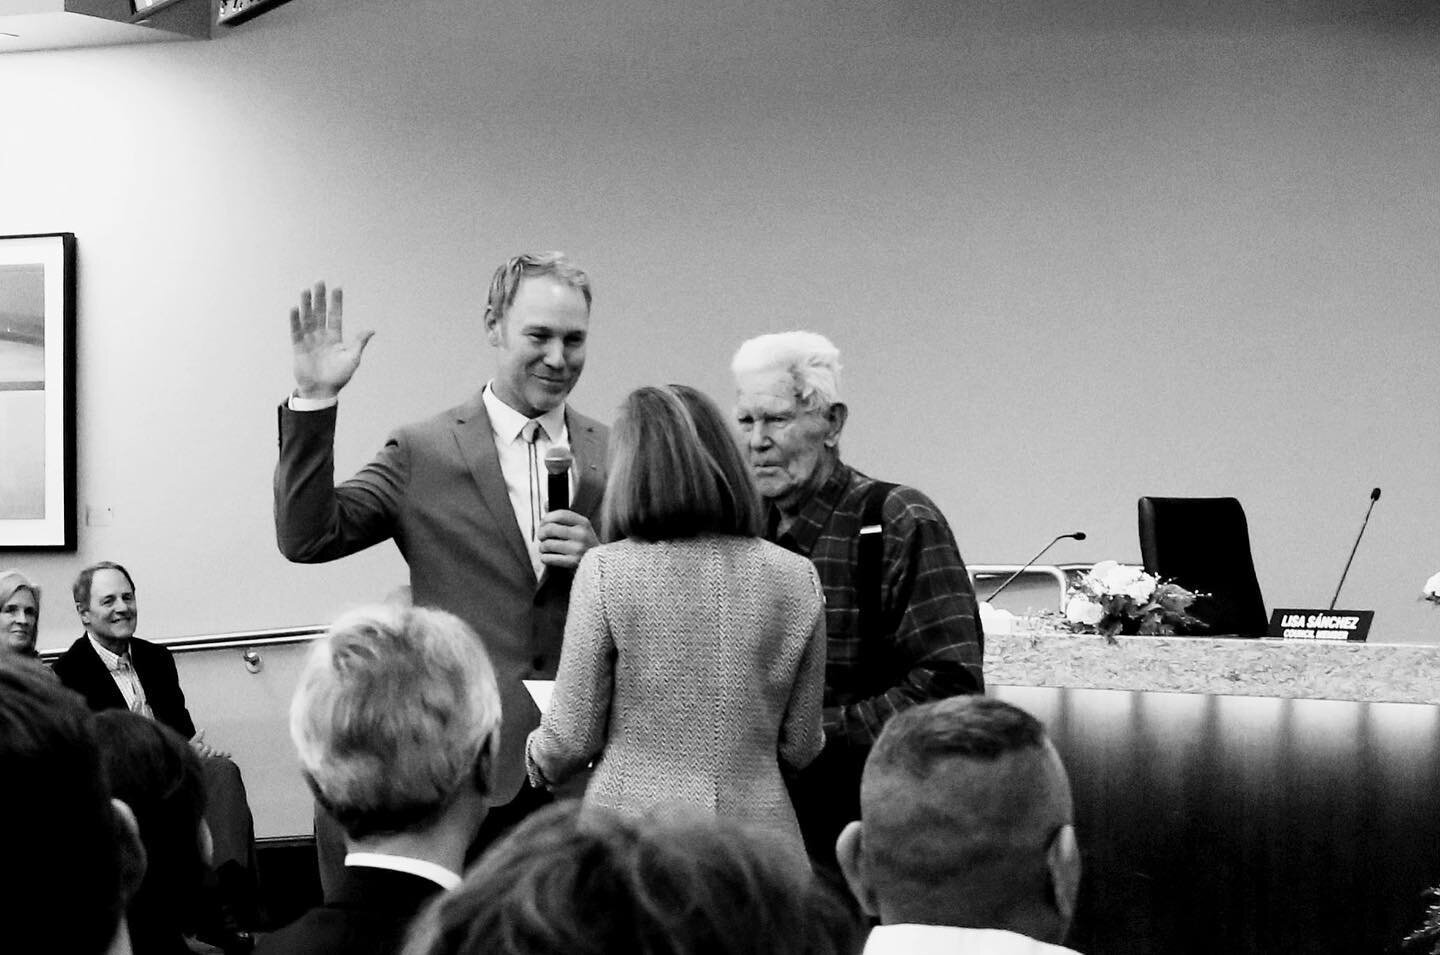 Last night began one of the greatest opportunities of my life. The opportunity to serve the @city_of_boise as a City Council Member. I am so thankful, I am so humbled, and I am so freaking excited!

To get to share this moment with my 97 year old Gra